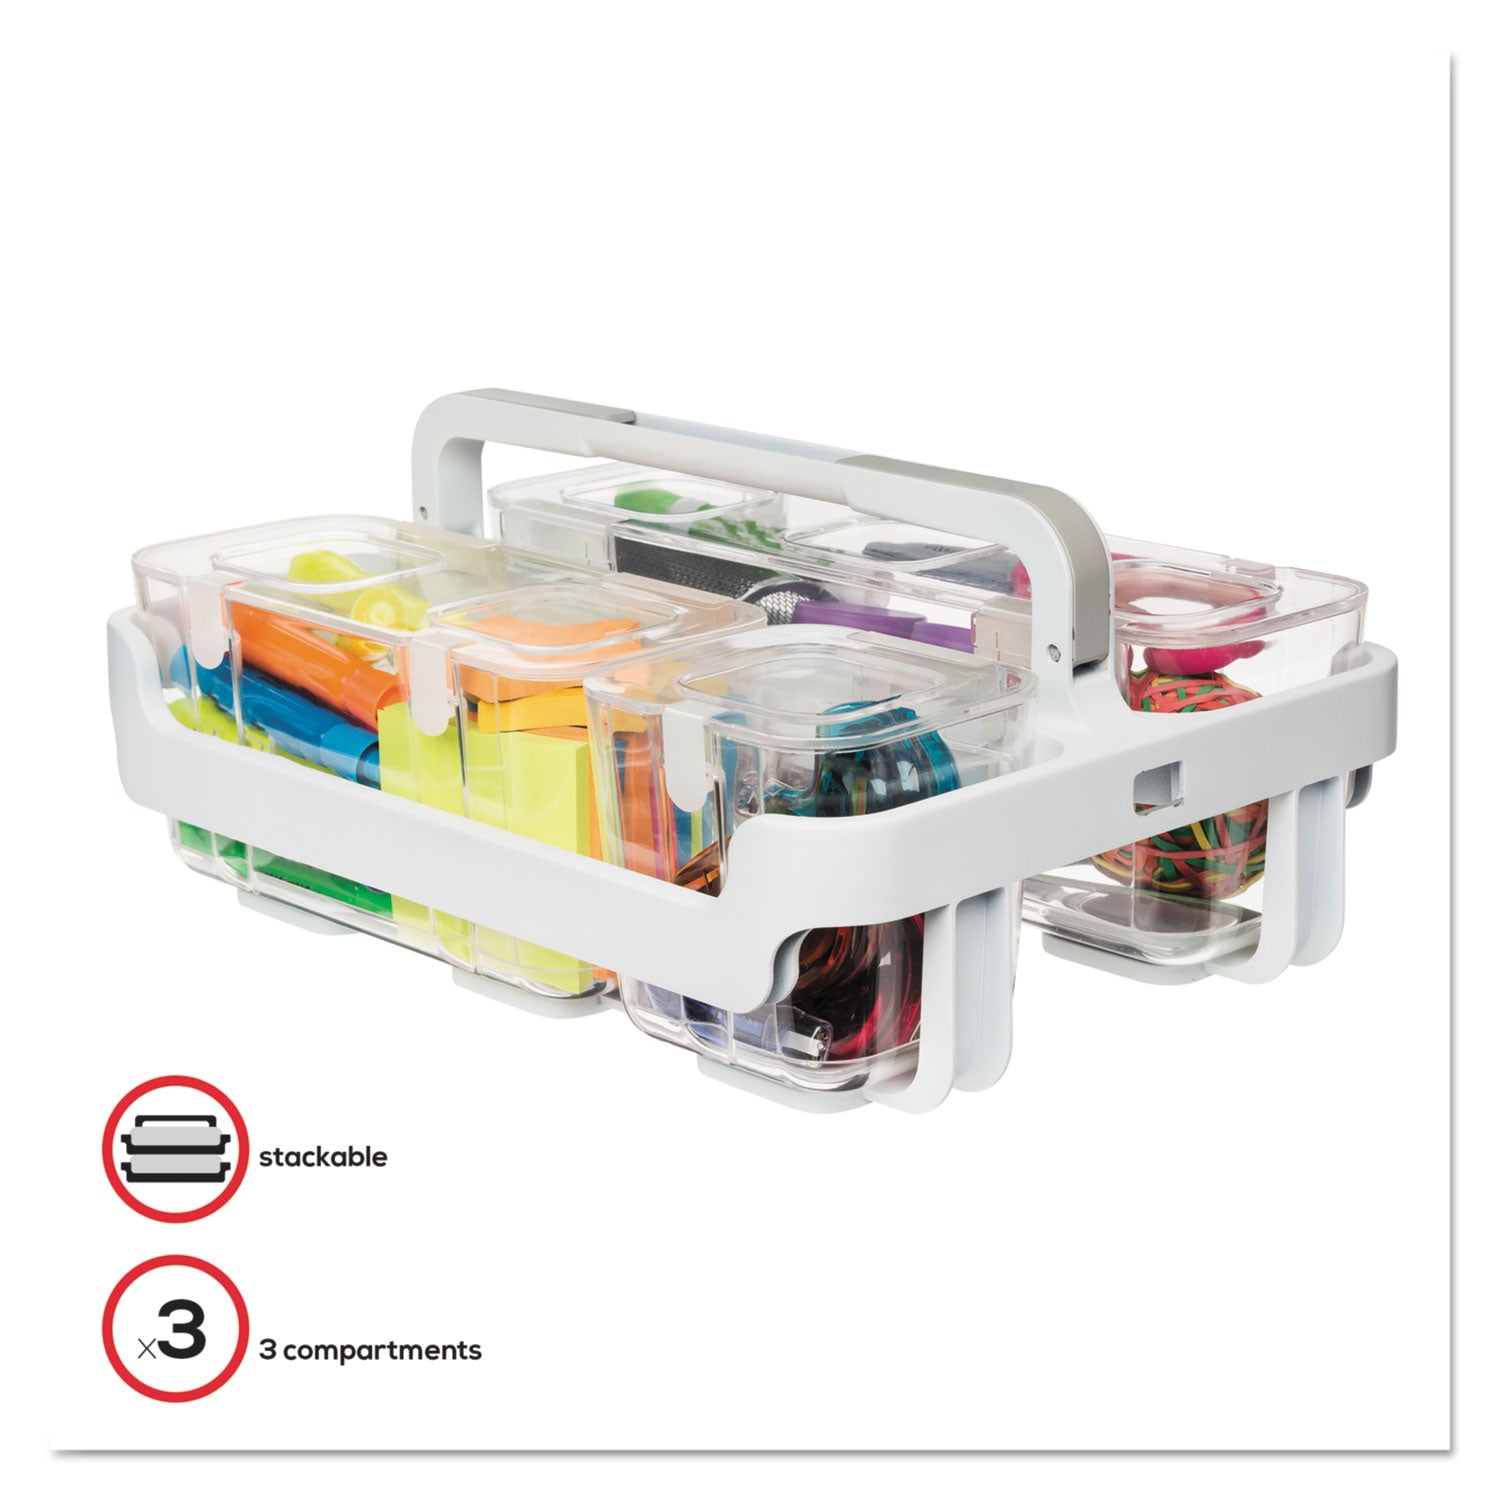 stackable-caddy-organizer-with-s-m-and-l-containers-plastic-105-x-14-x-65-white-caddy-clear-containers_def29003 - 2